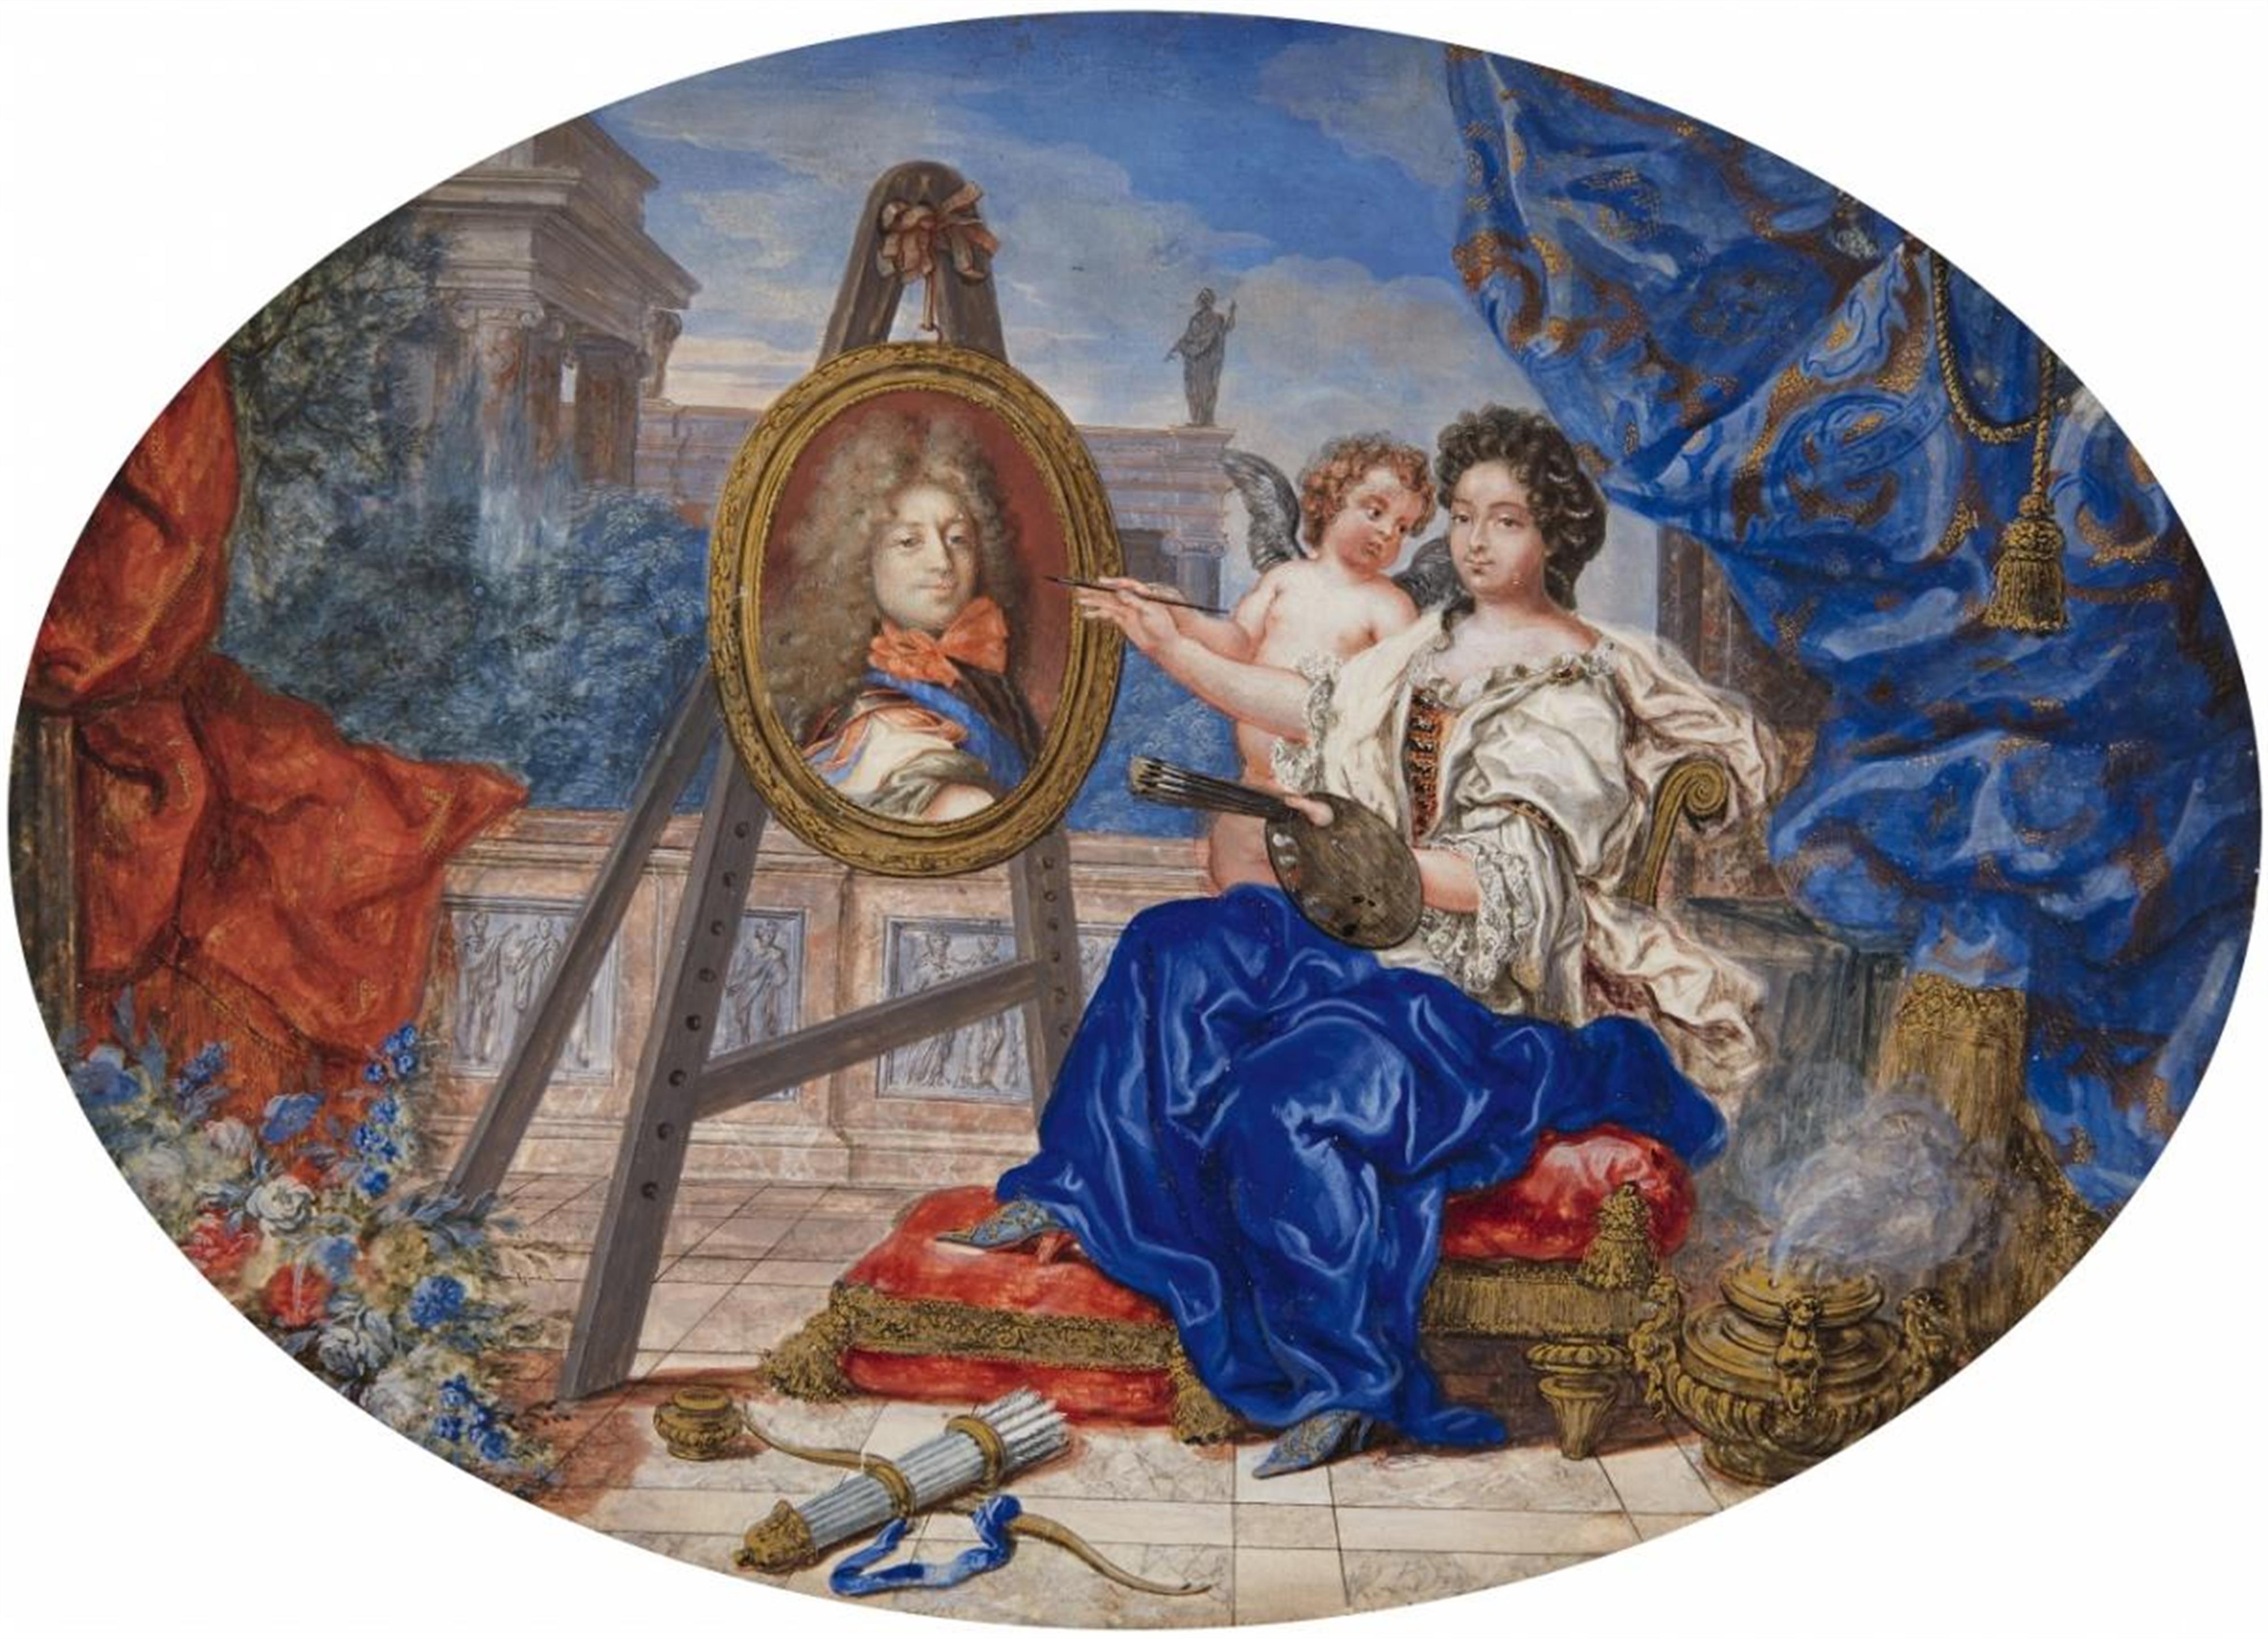 Joseph Werner - Allegory of the Marriage of the Grand Dauphin Louis of France and Princess Maria Anna of Bavaria